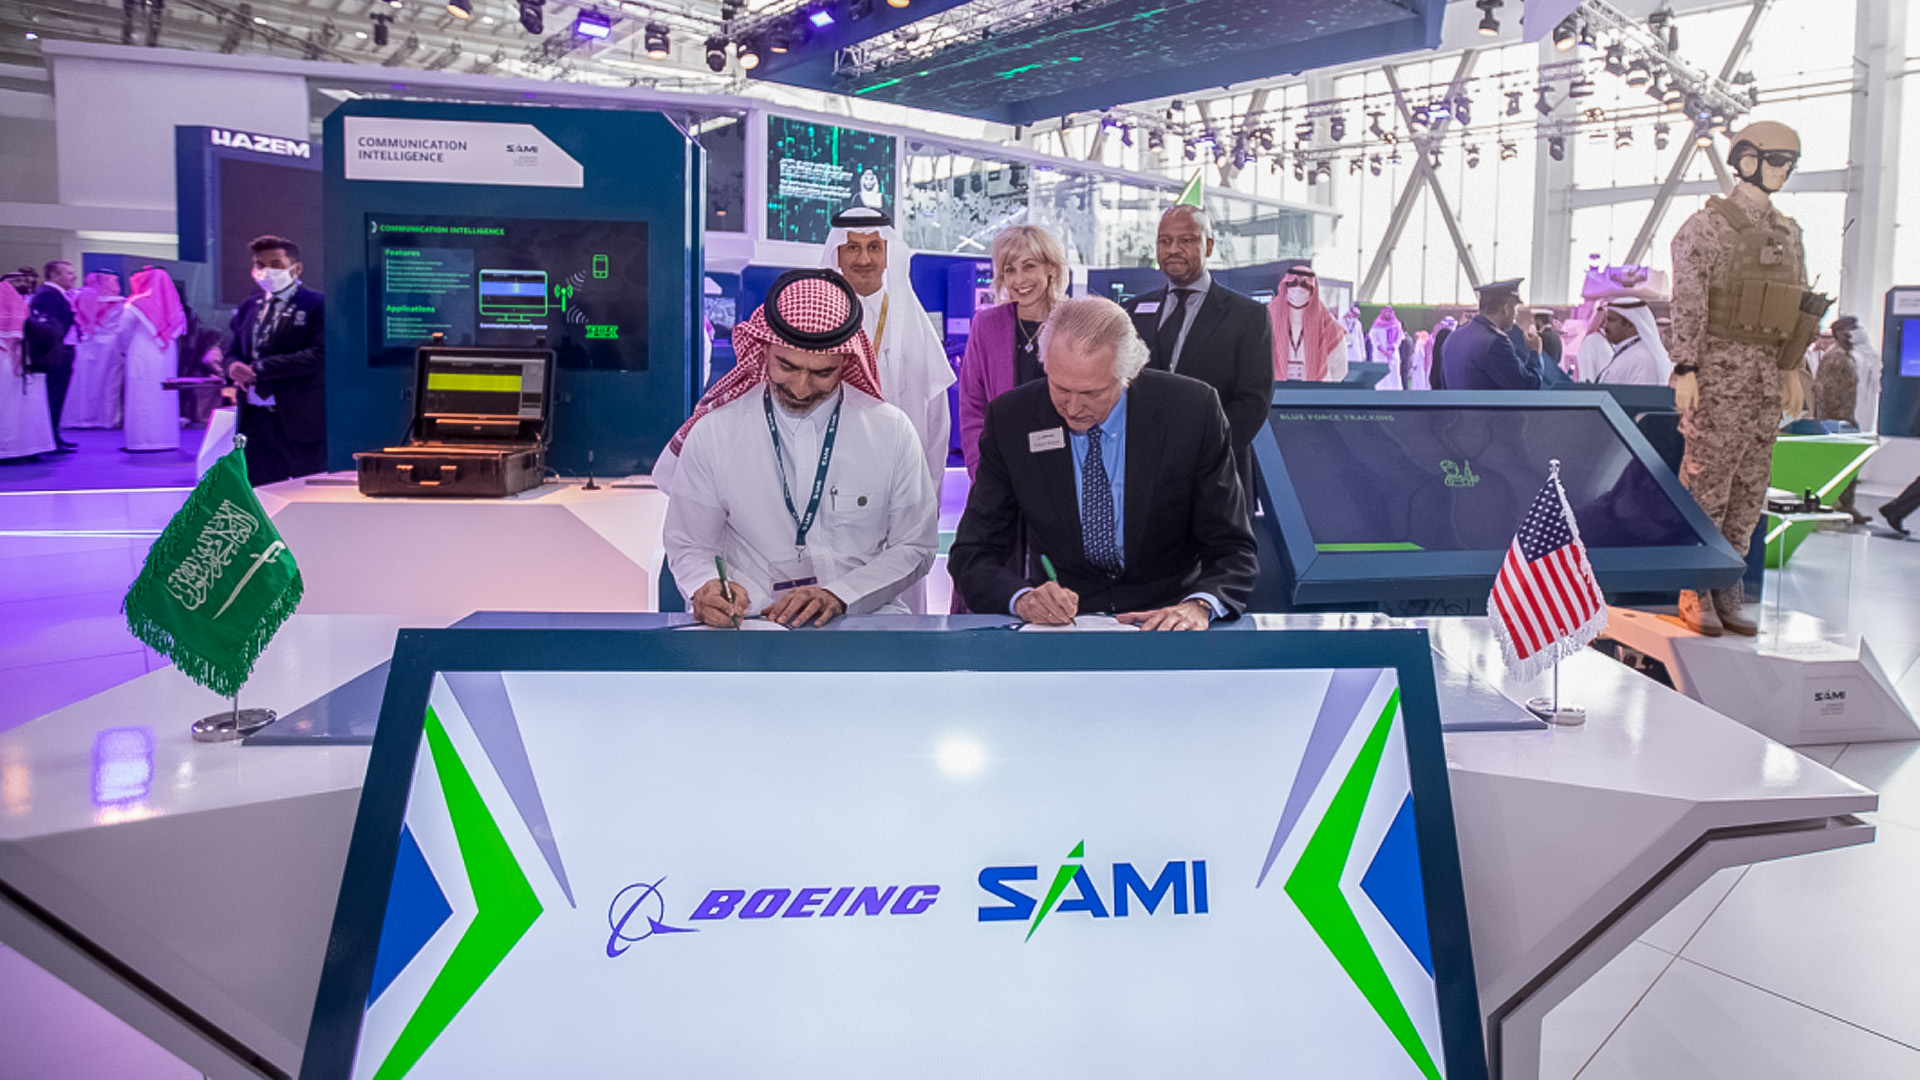 SAMI Group signs joint venture agreement with Boeing